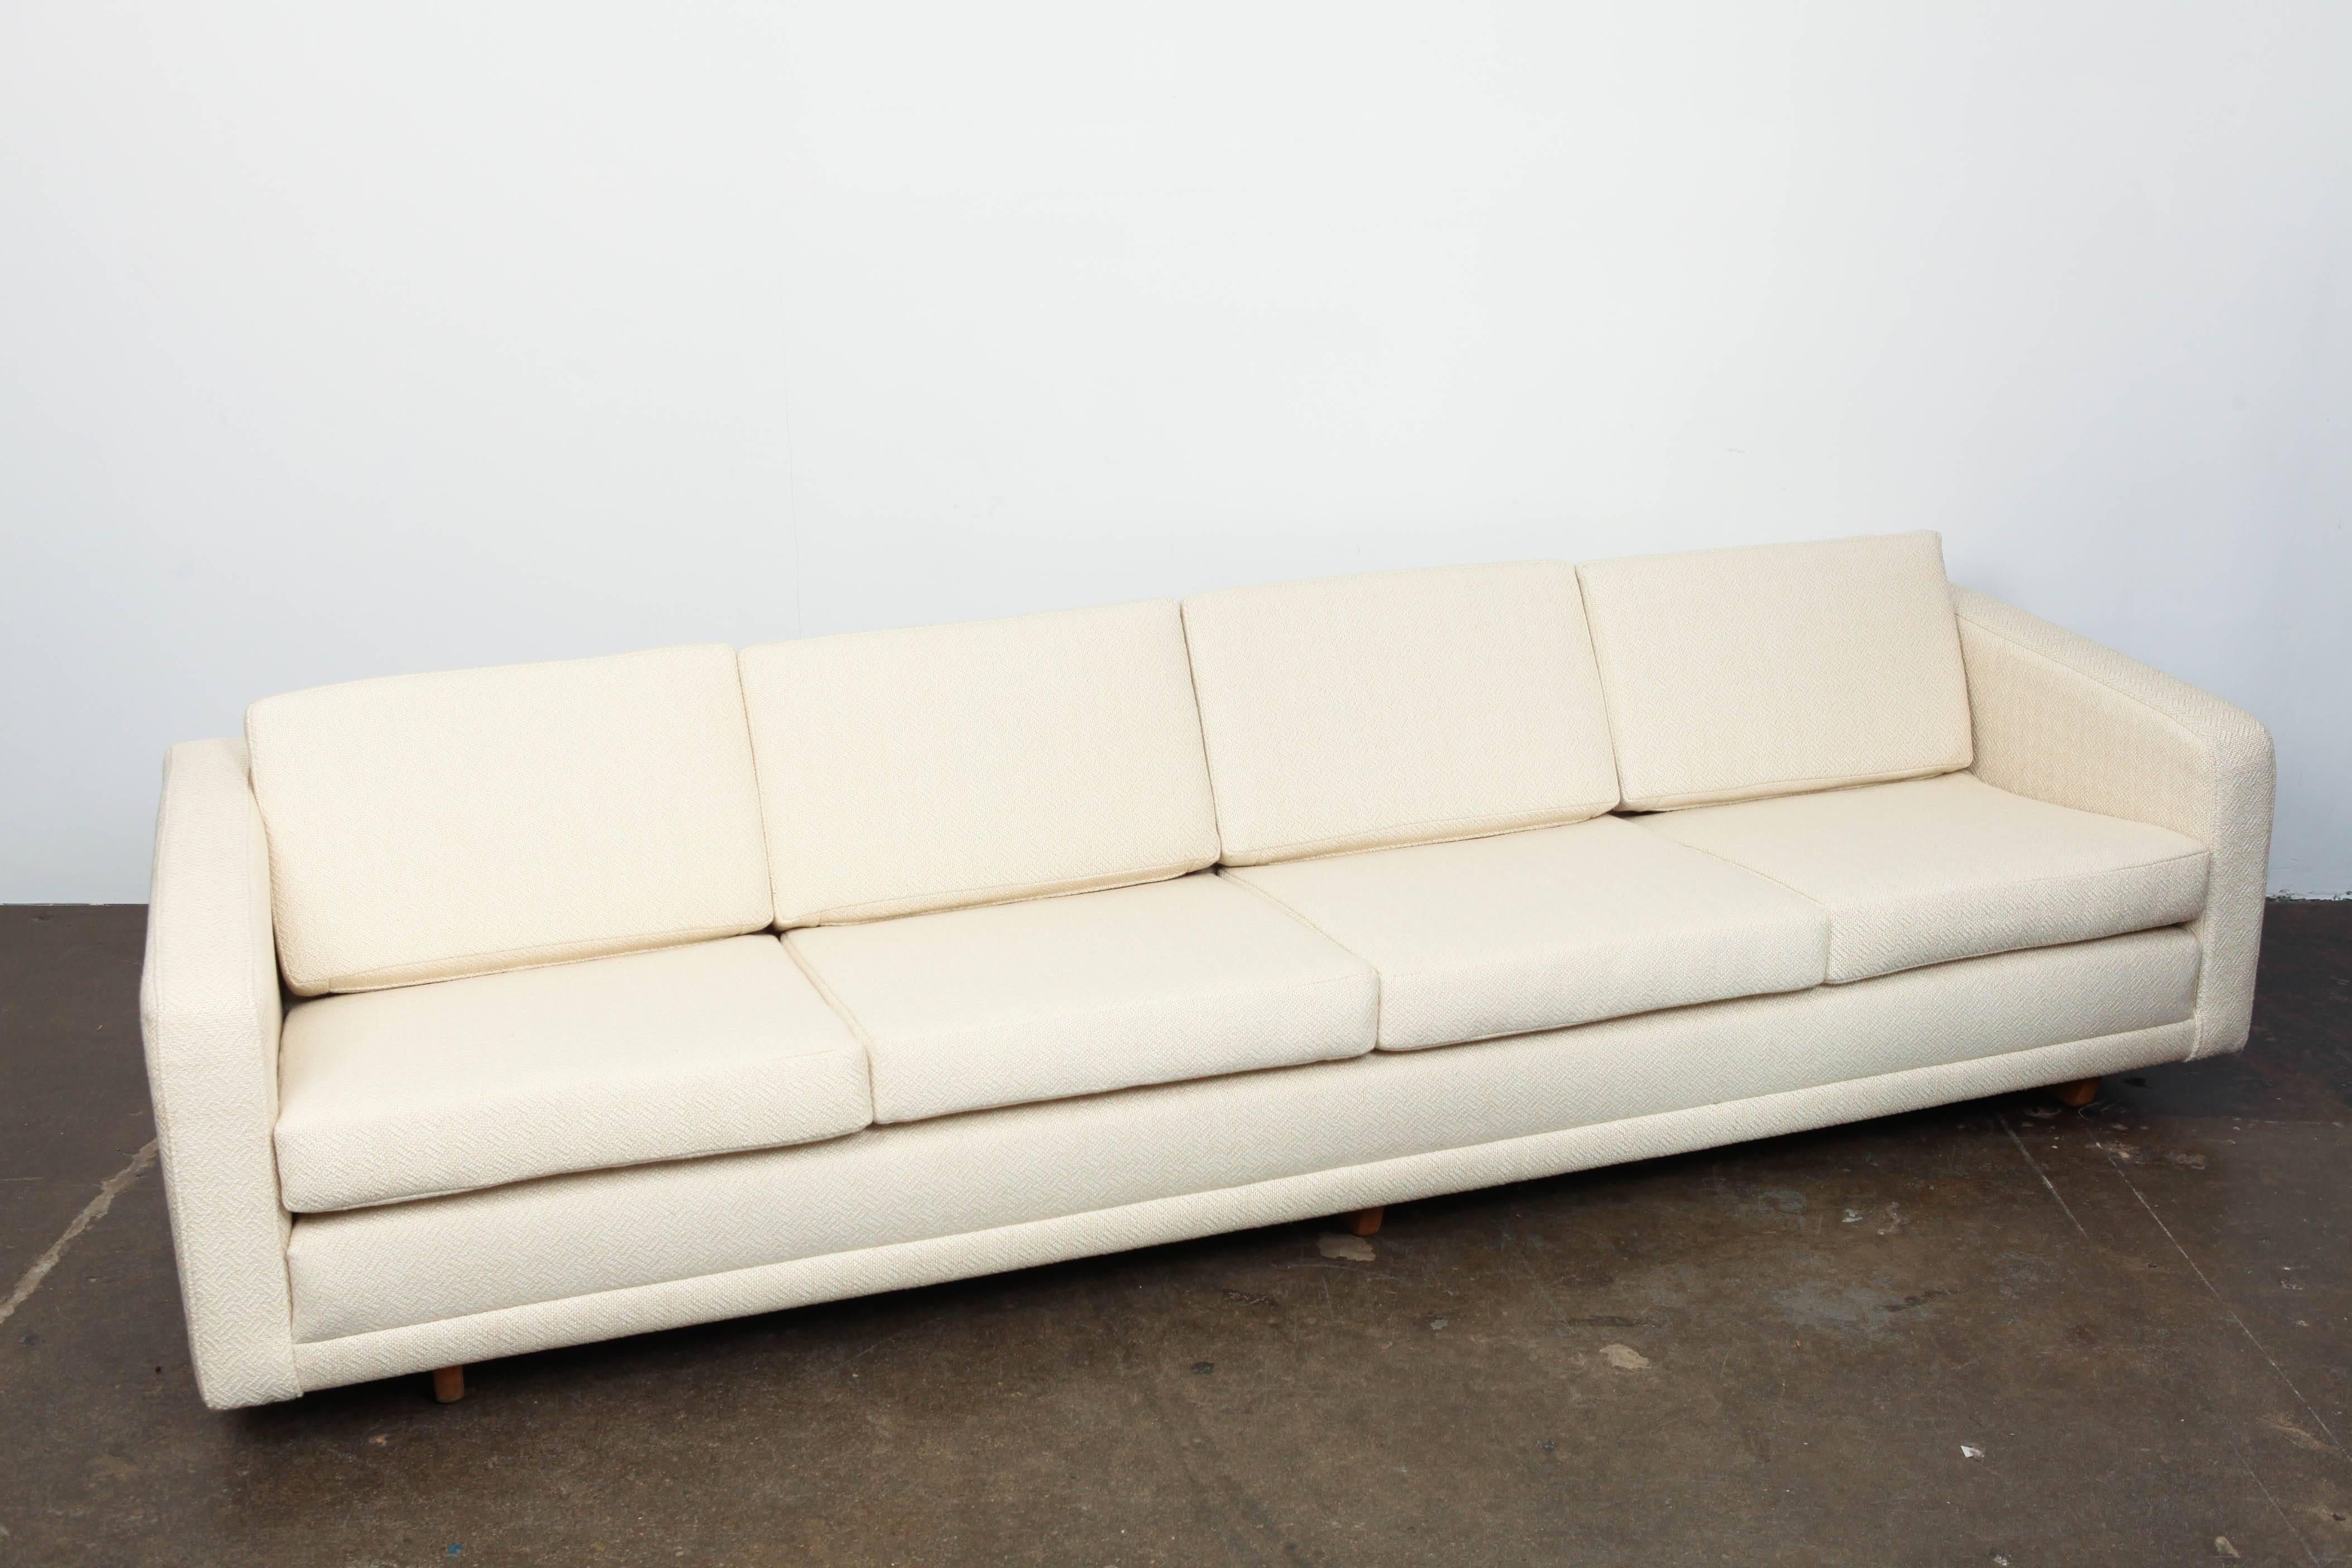 Danish Mid-Century Modern long four-seat sofa by Børge Mogensen, model 205. Produced in 1962 by Fredericia Mobler. Newly upholstered in an off-white Belgian bouclé.